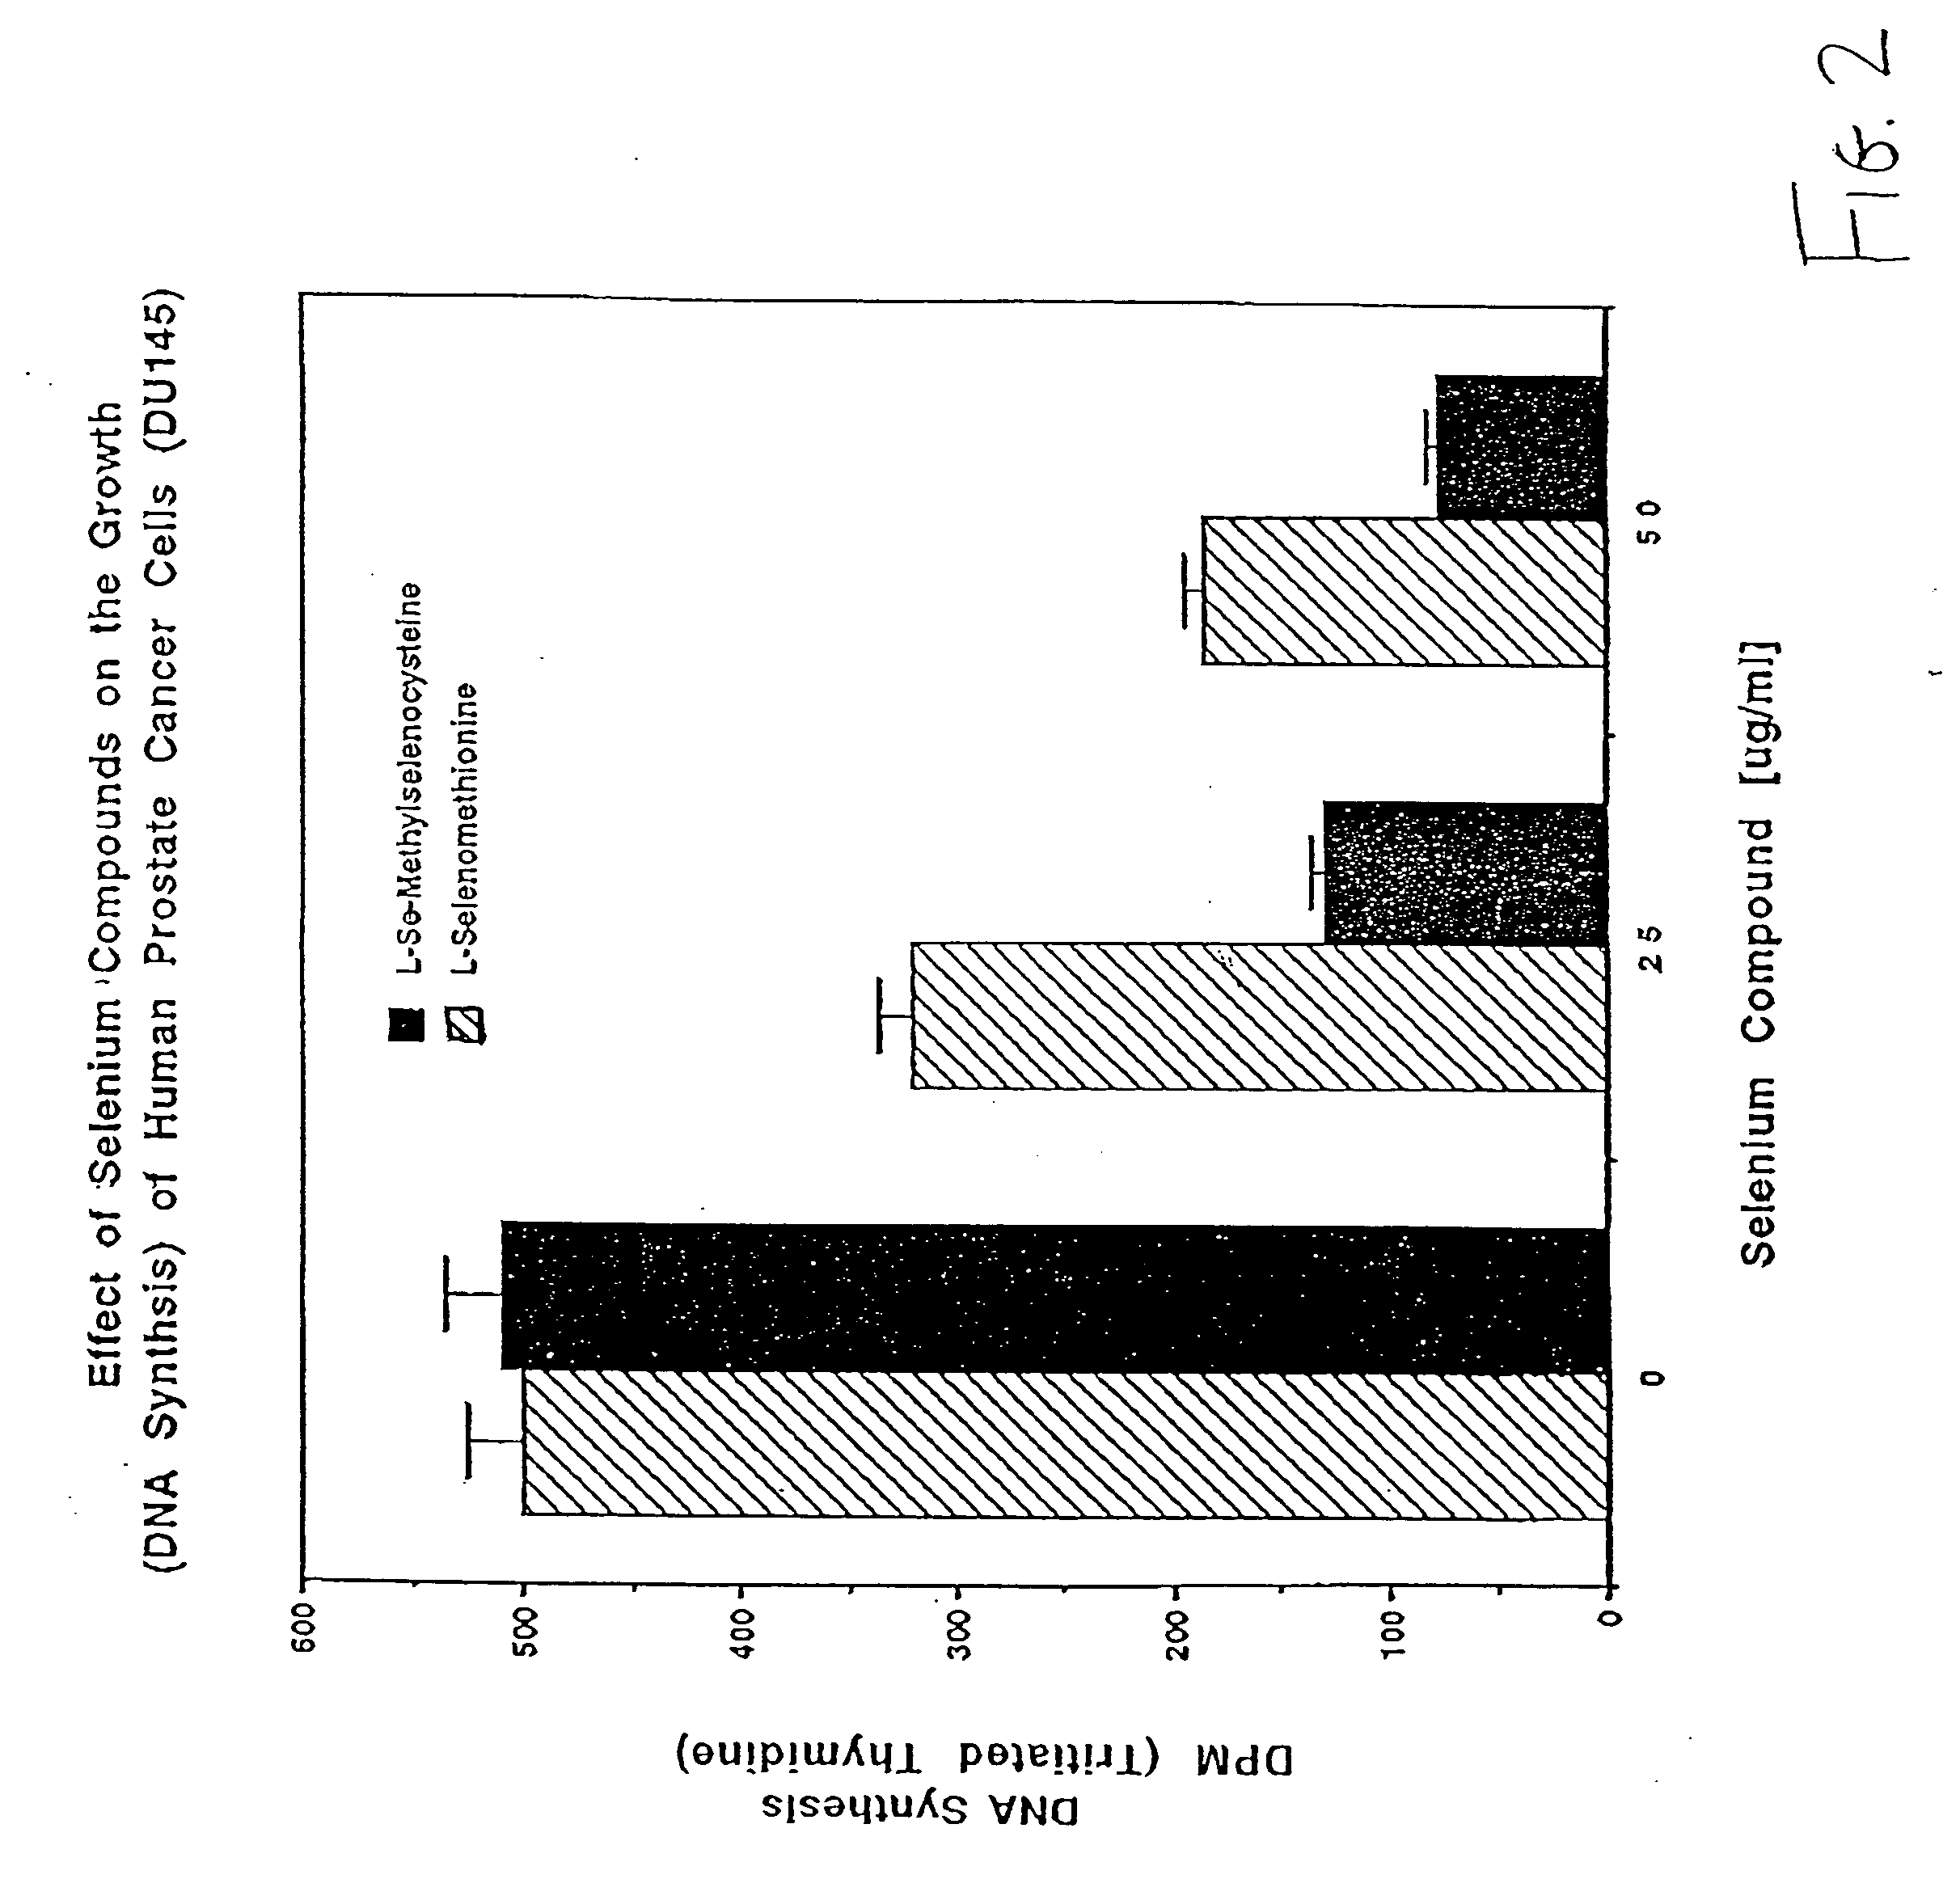 Method of using synthetic L-Se-methylselenocysteine as a nutriceutical and a method of its synthesis